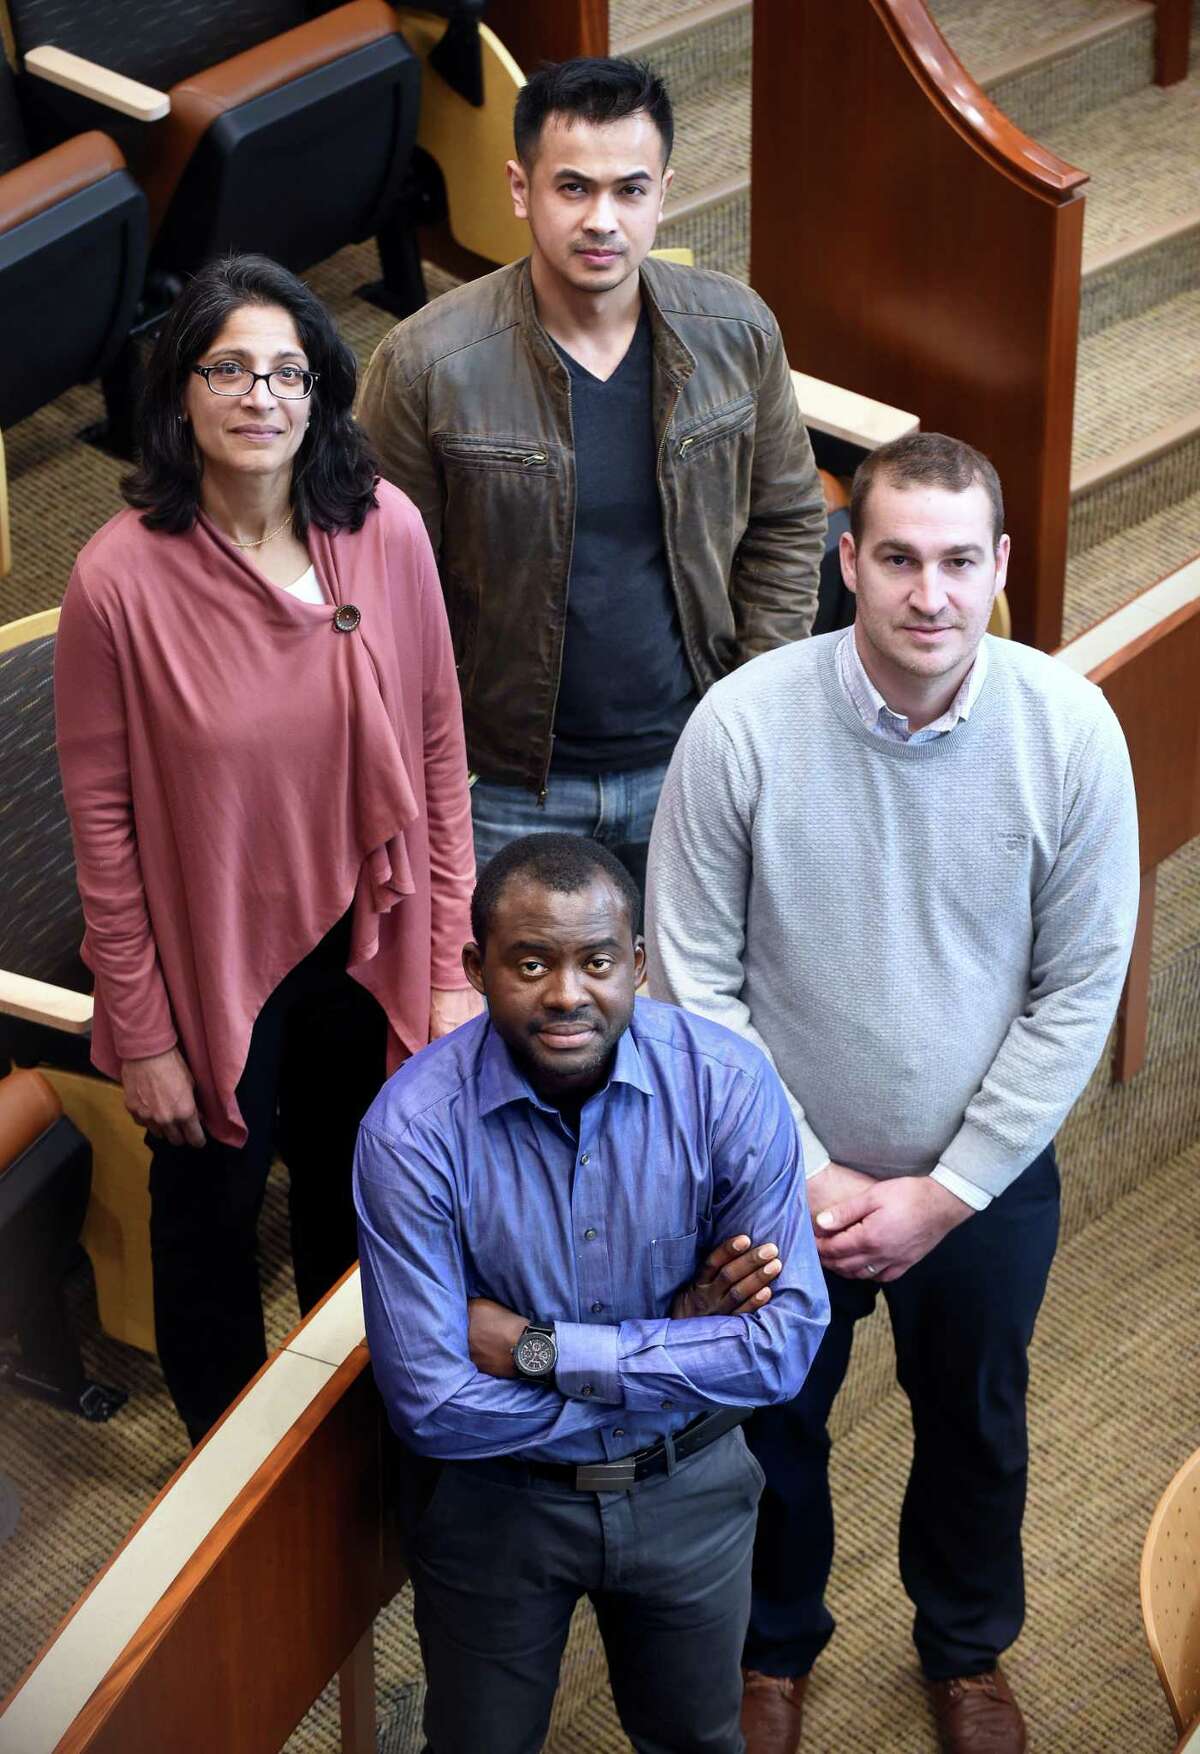 Toto Kisaku, front, of the Democratic Republic of Congo, with, from left, QuinnipiacLaw professor Sheila Hayre and law students Thai Chhay and Brendan Lawless.